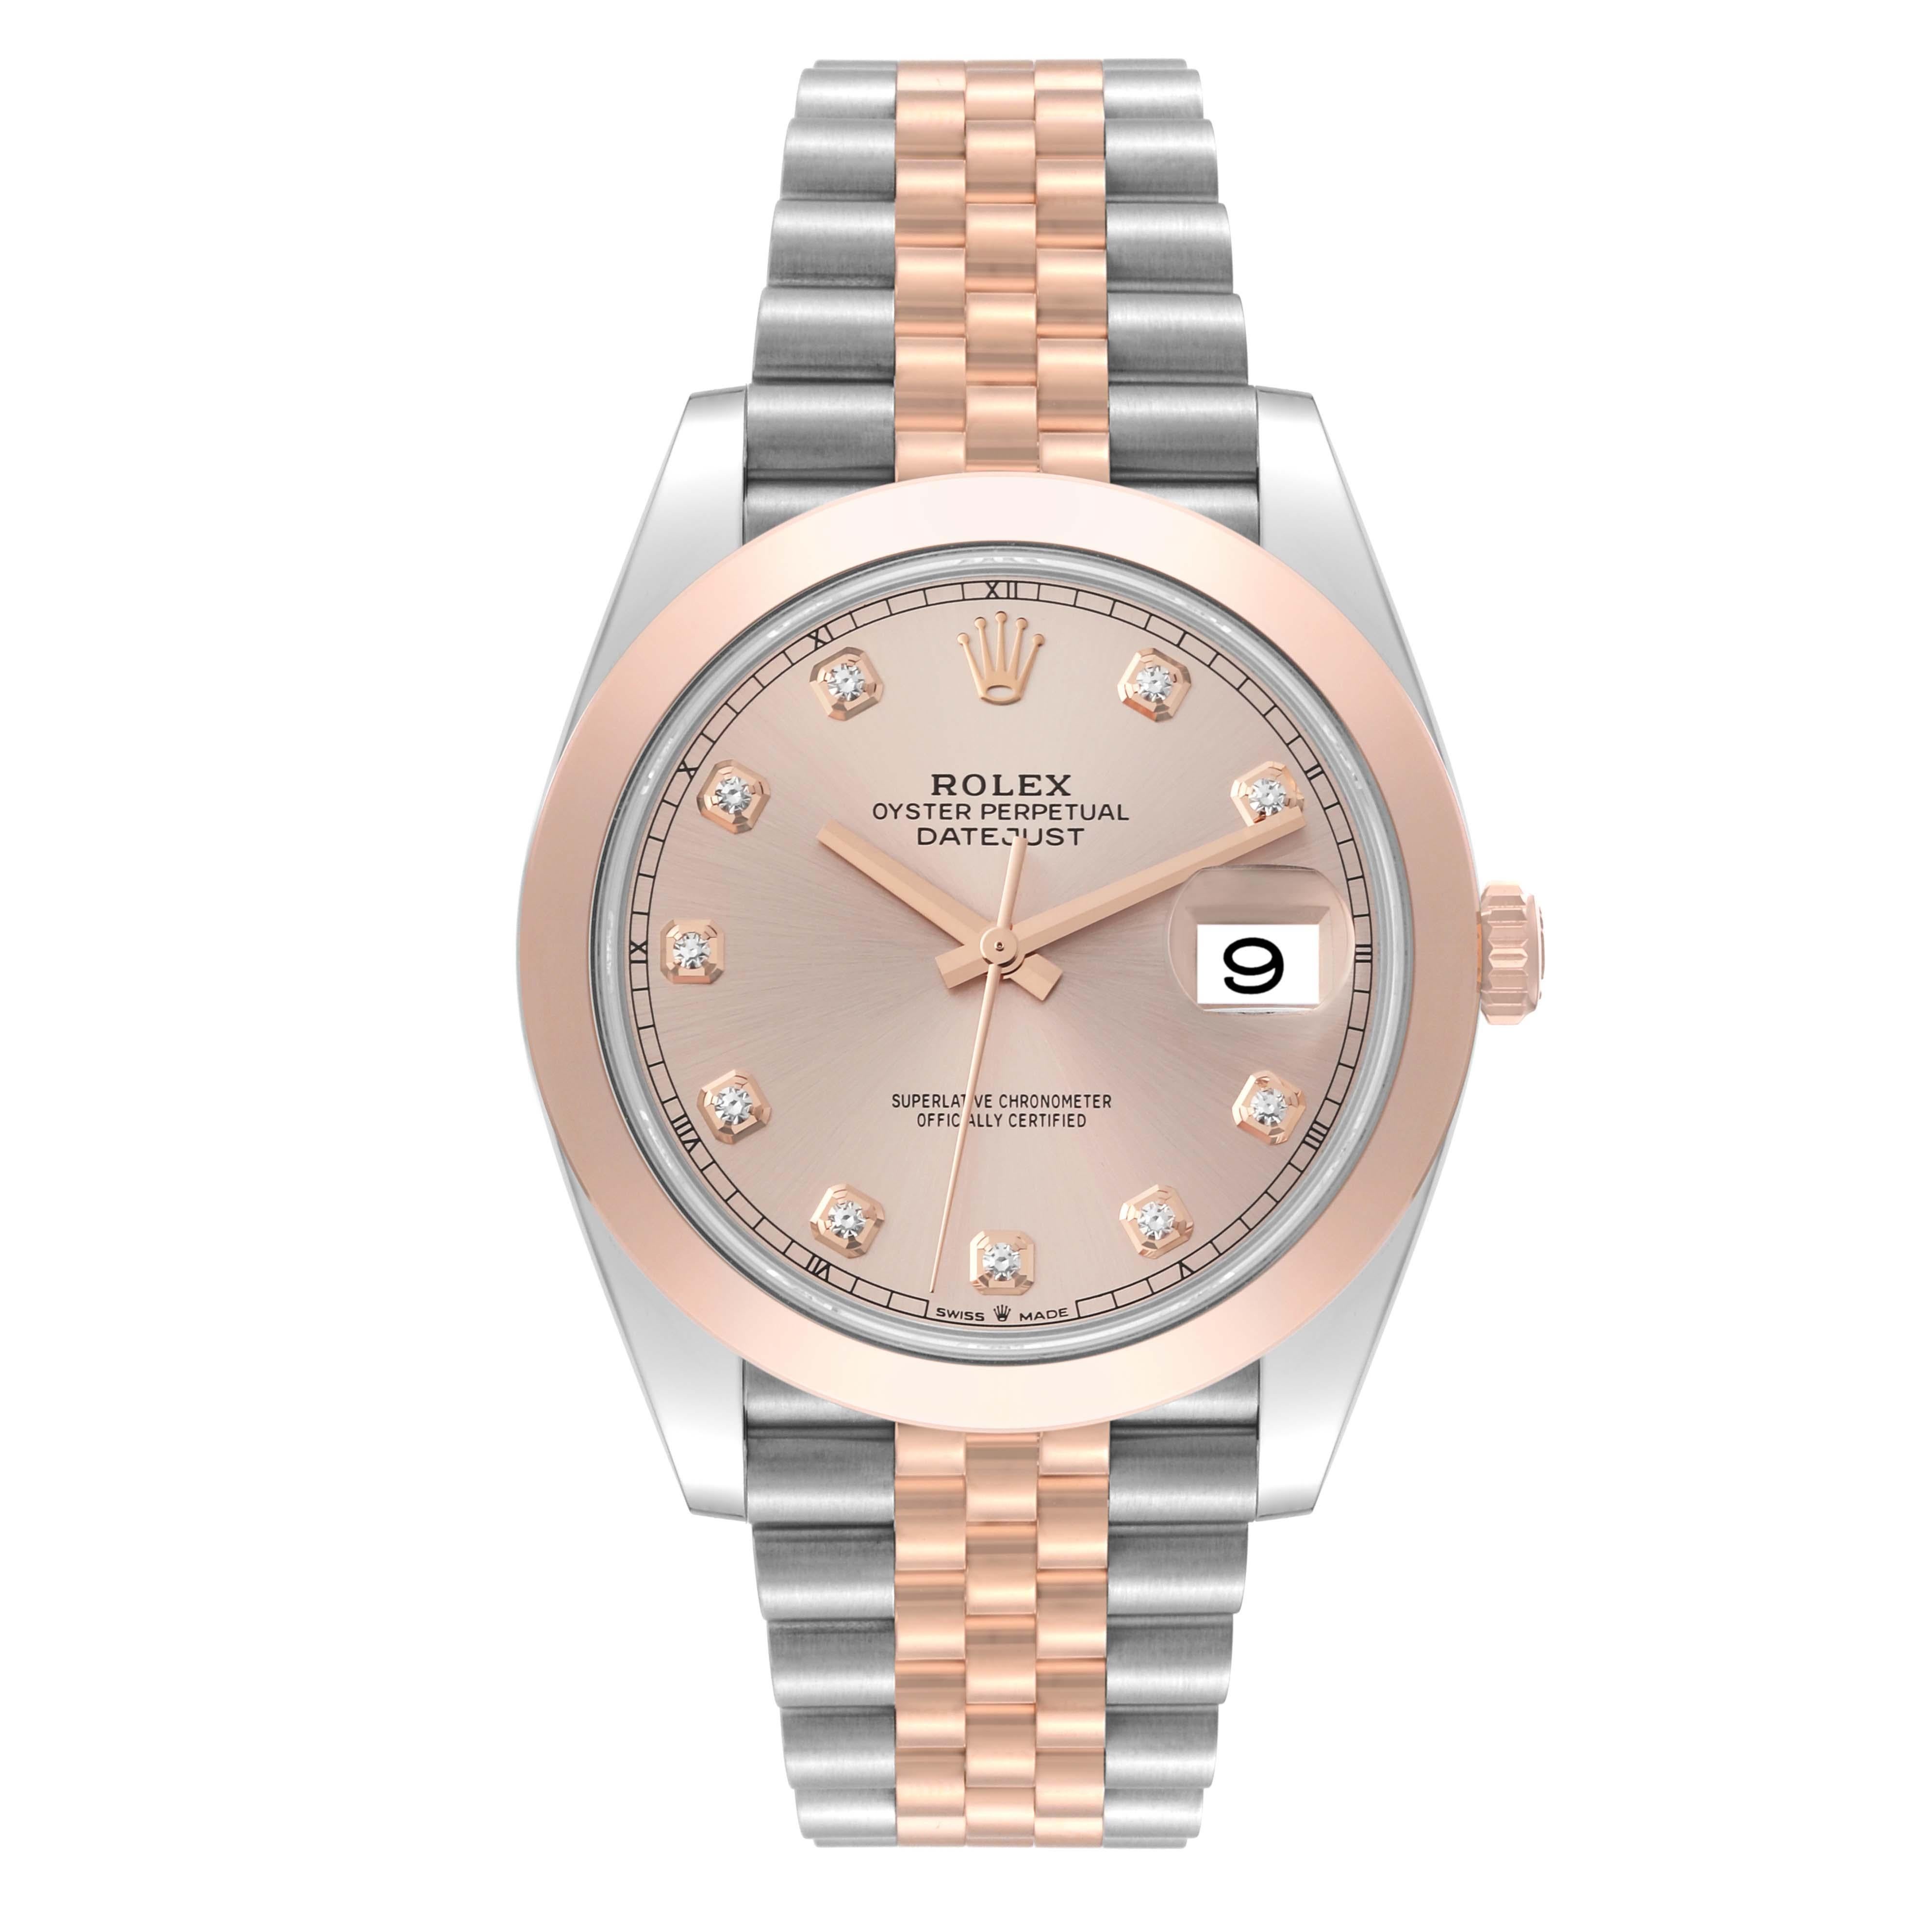 Rolex Datejust 41 Steel Rose Gold Diamond Dial Mens Watch 126301 Box Card For Sale 2